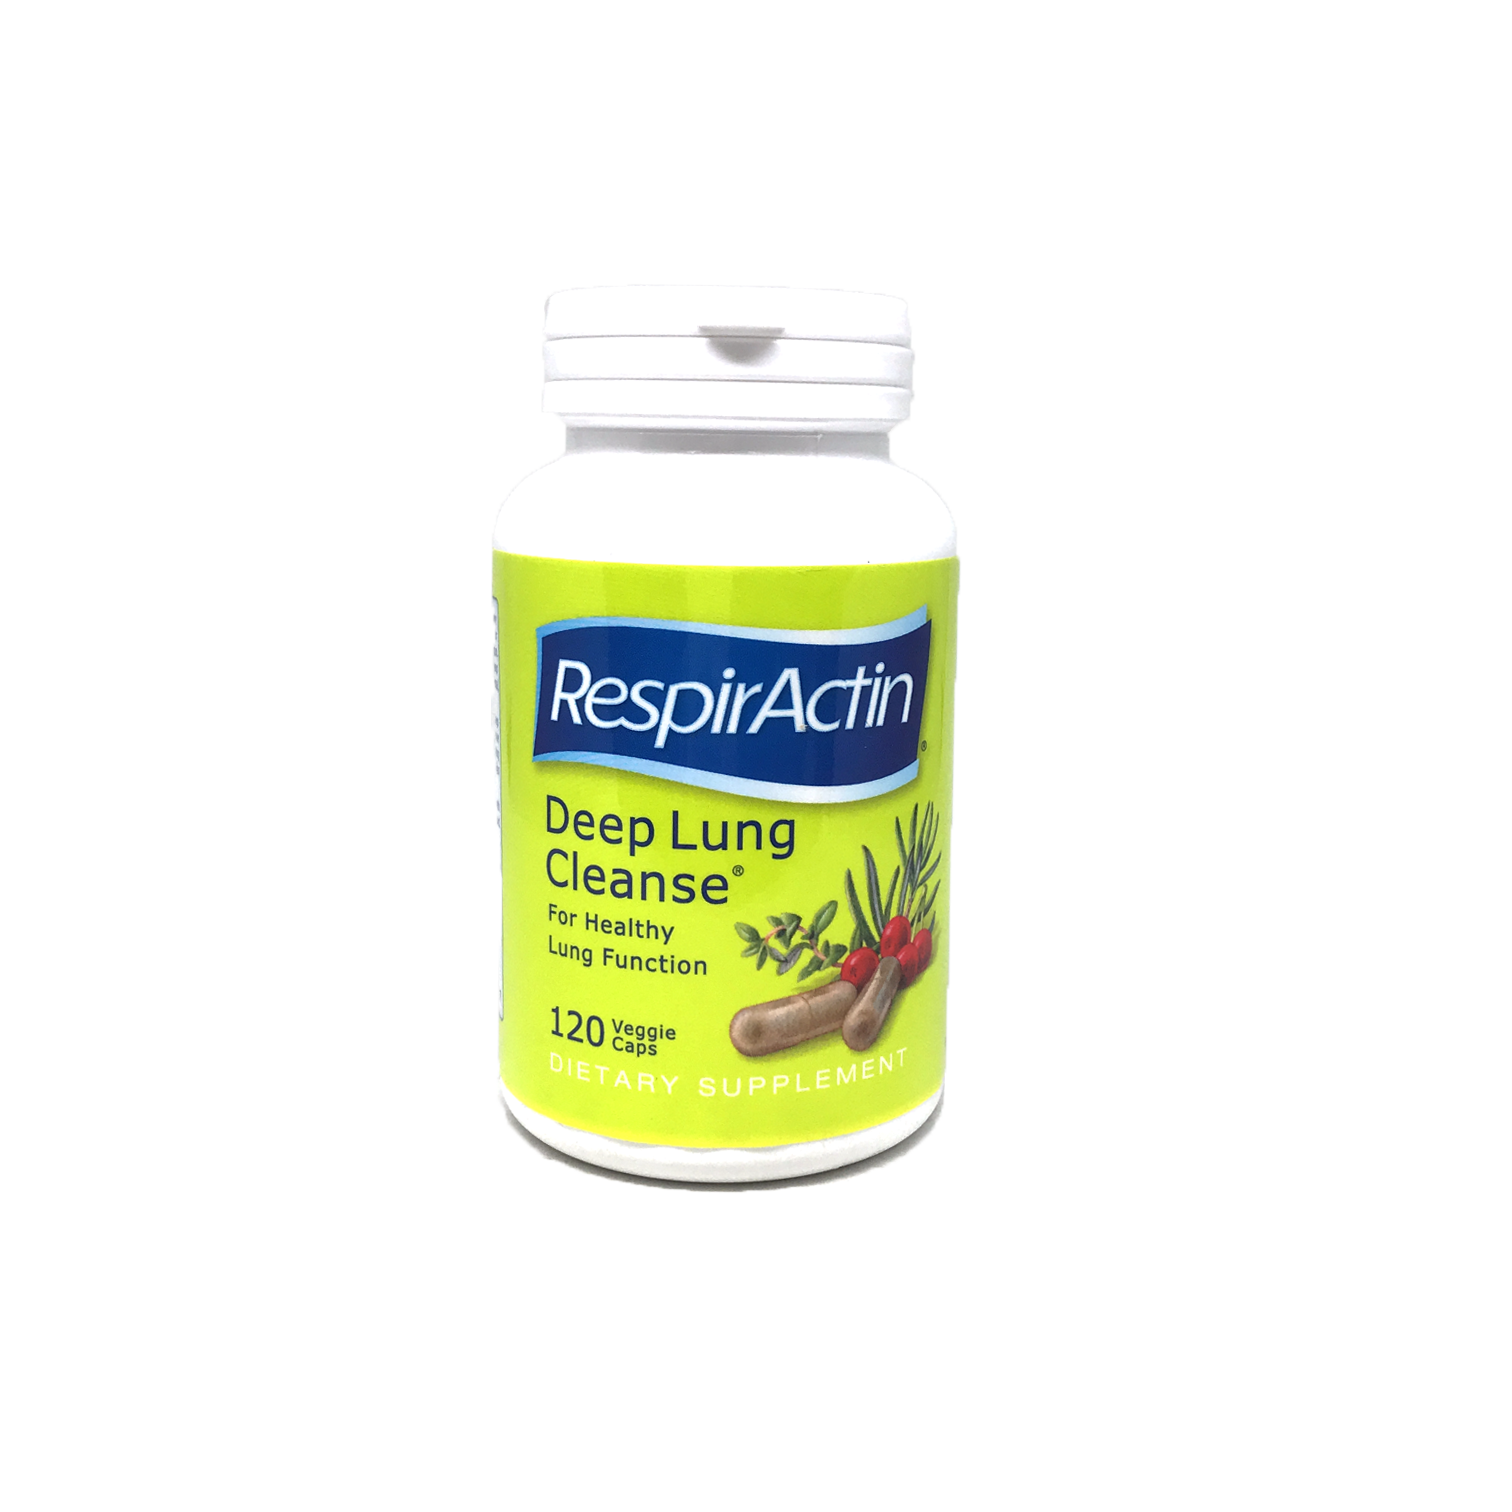 Respiractin Deep Lung Cleanse 120 Capsules